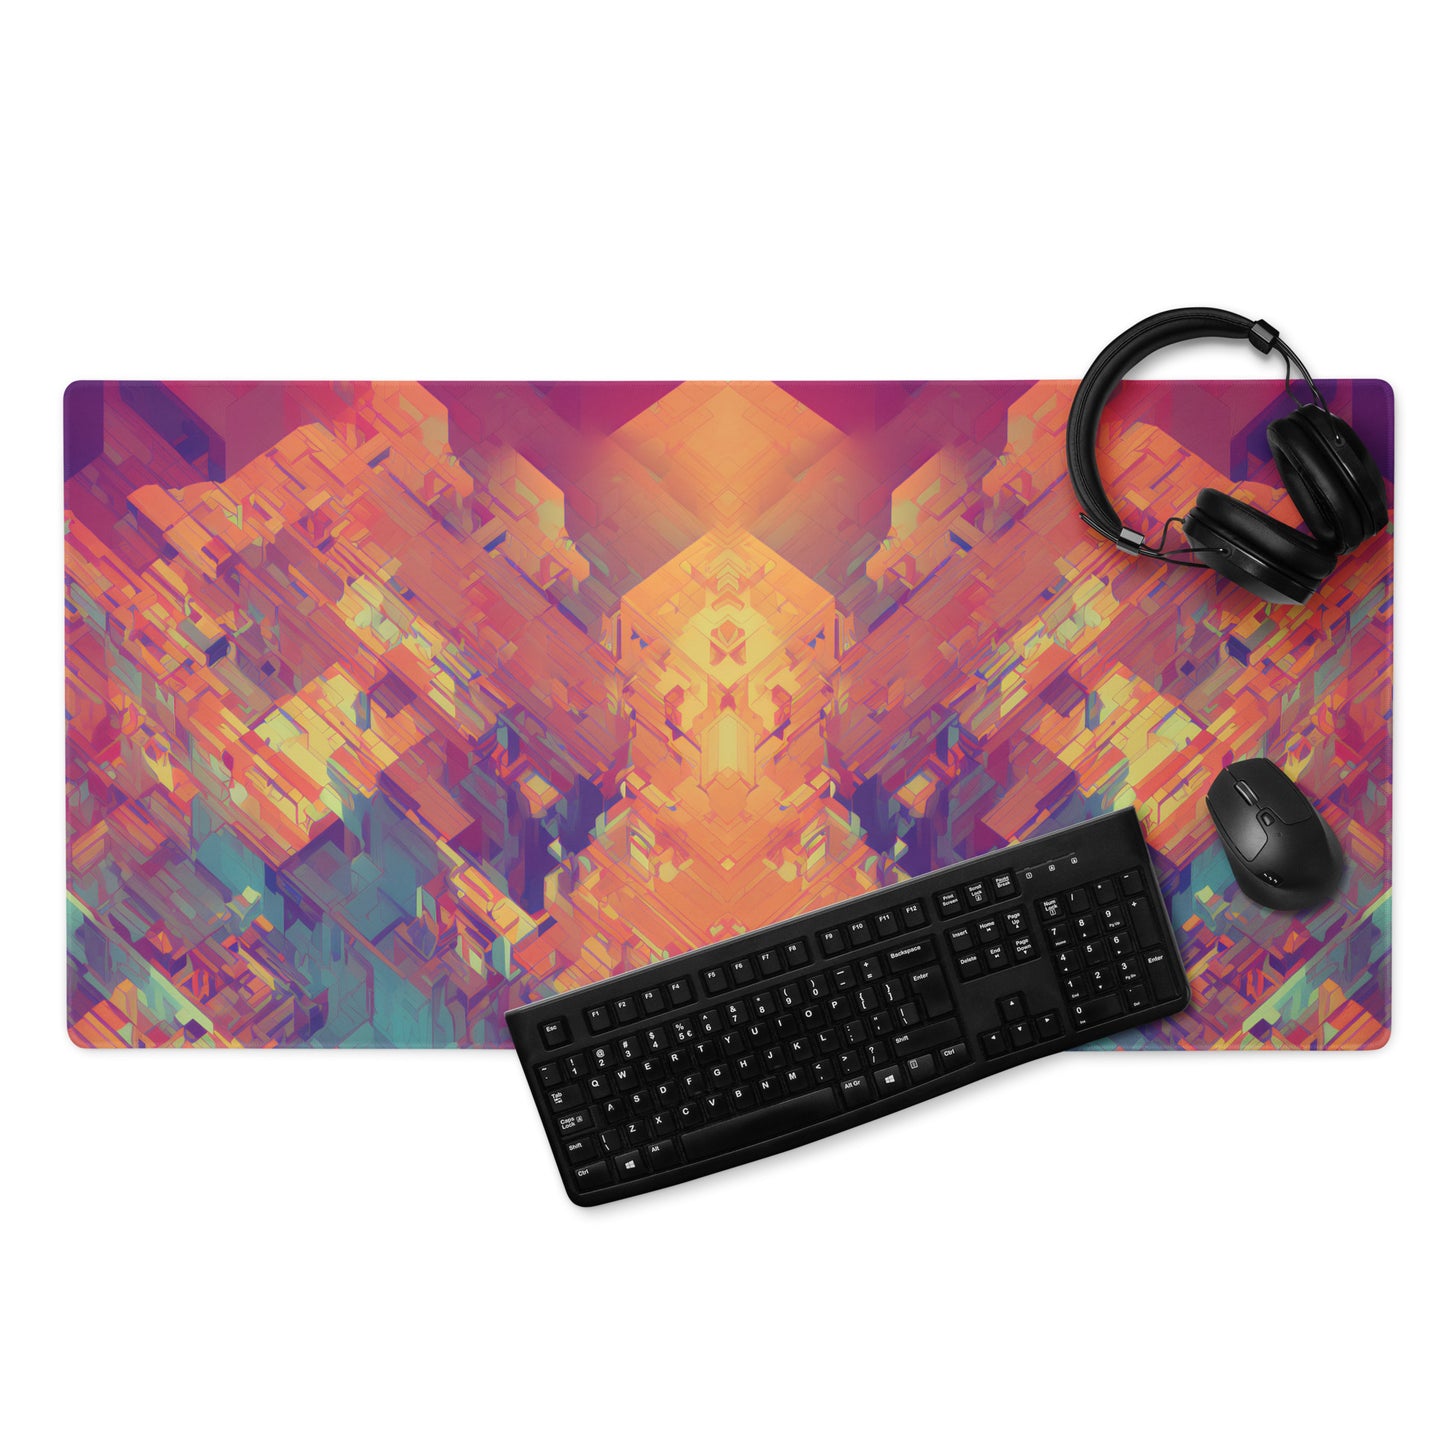 Retro Cubist : Gaming mouse pad